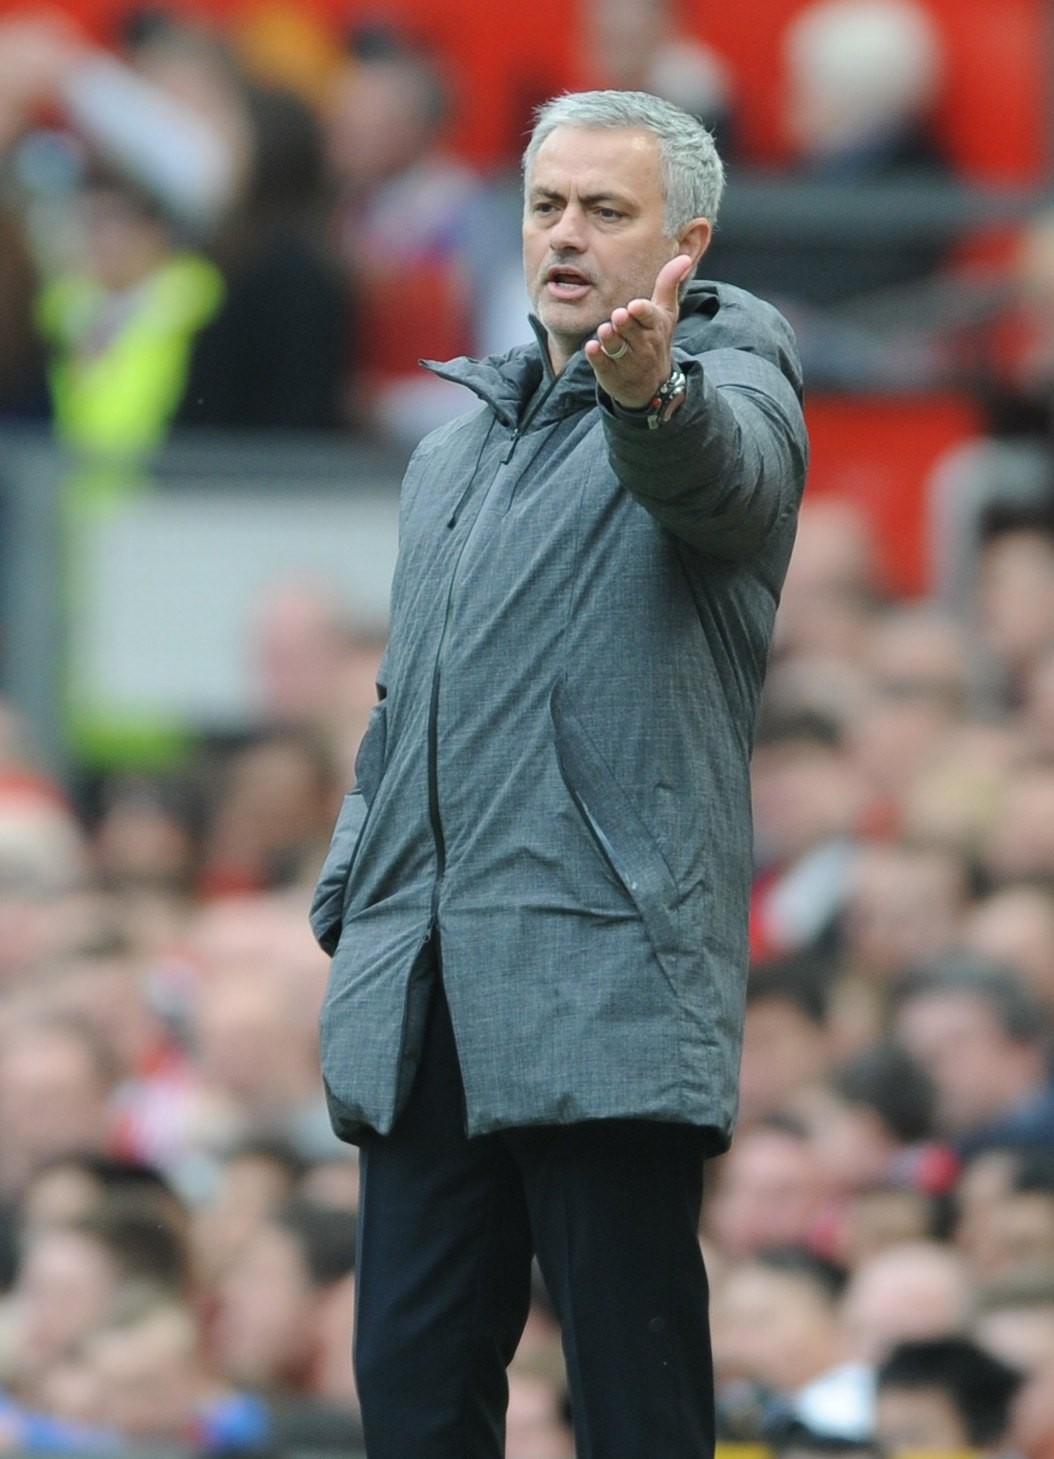 Manchester United manager Jose Mourinho gestures during the Premier League match against Swansea at Old Trafford. Photo: EPA